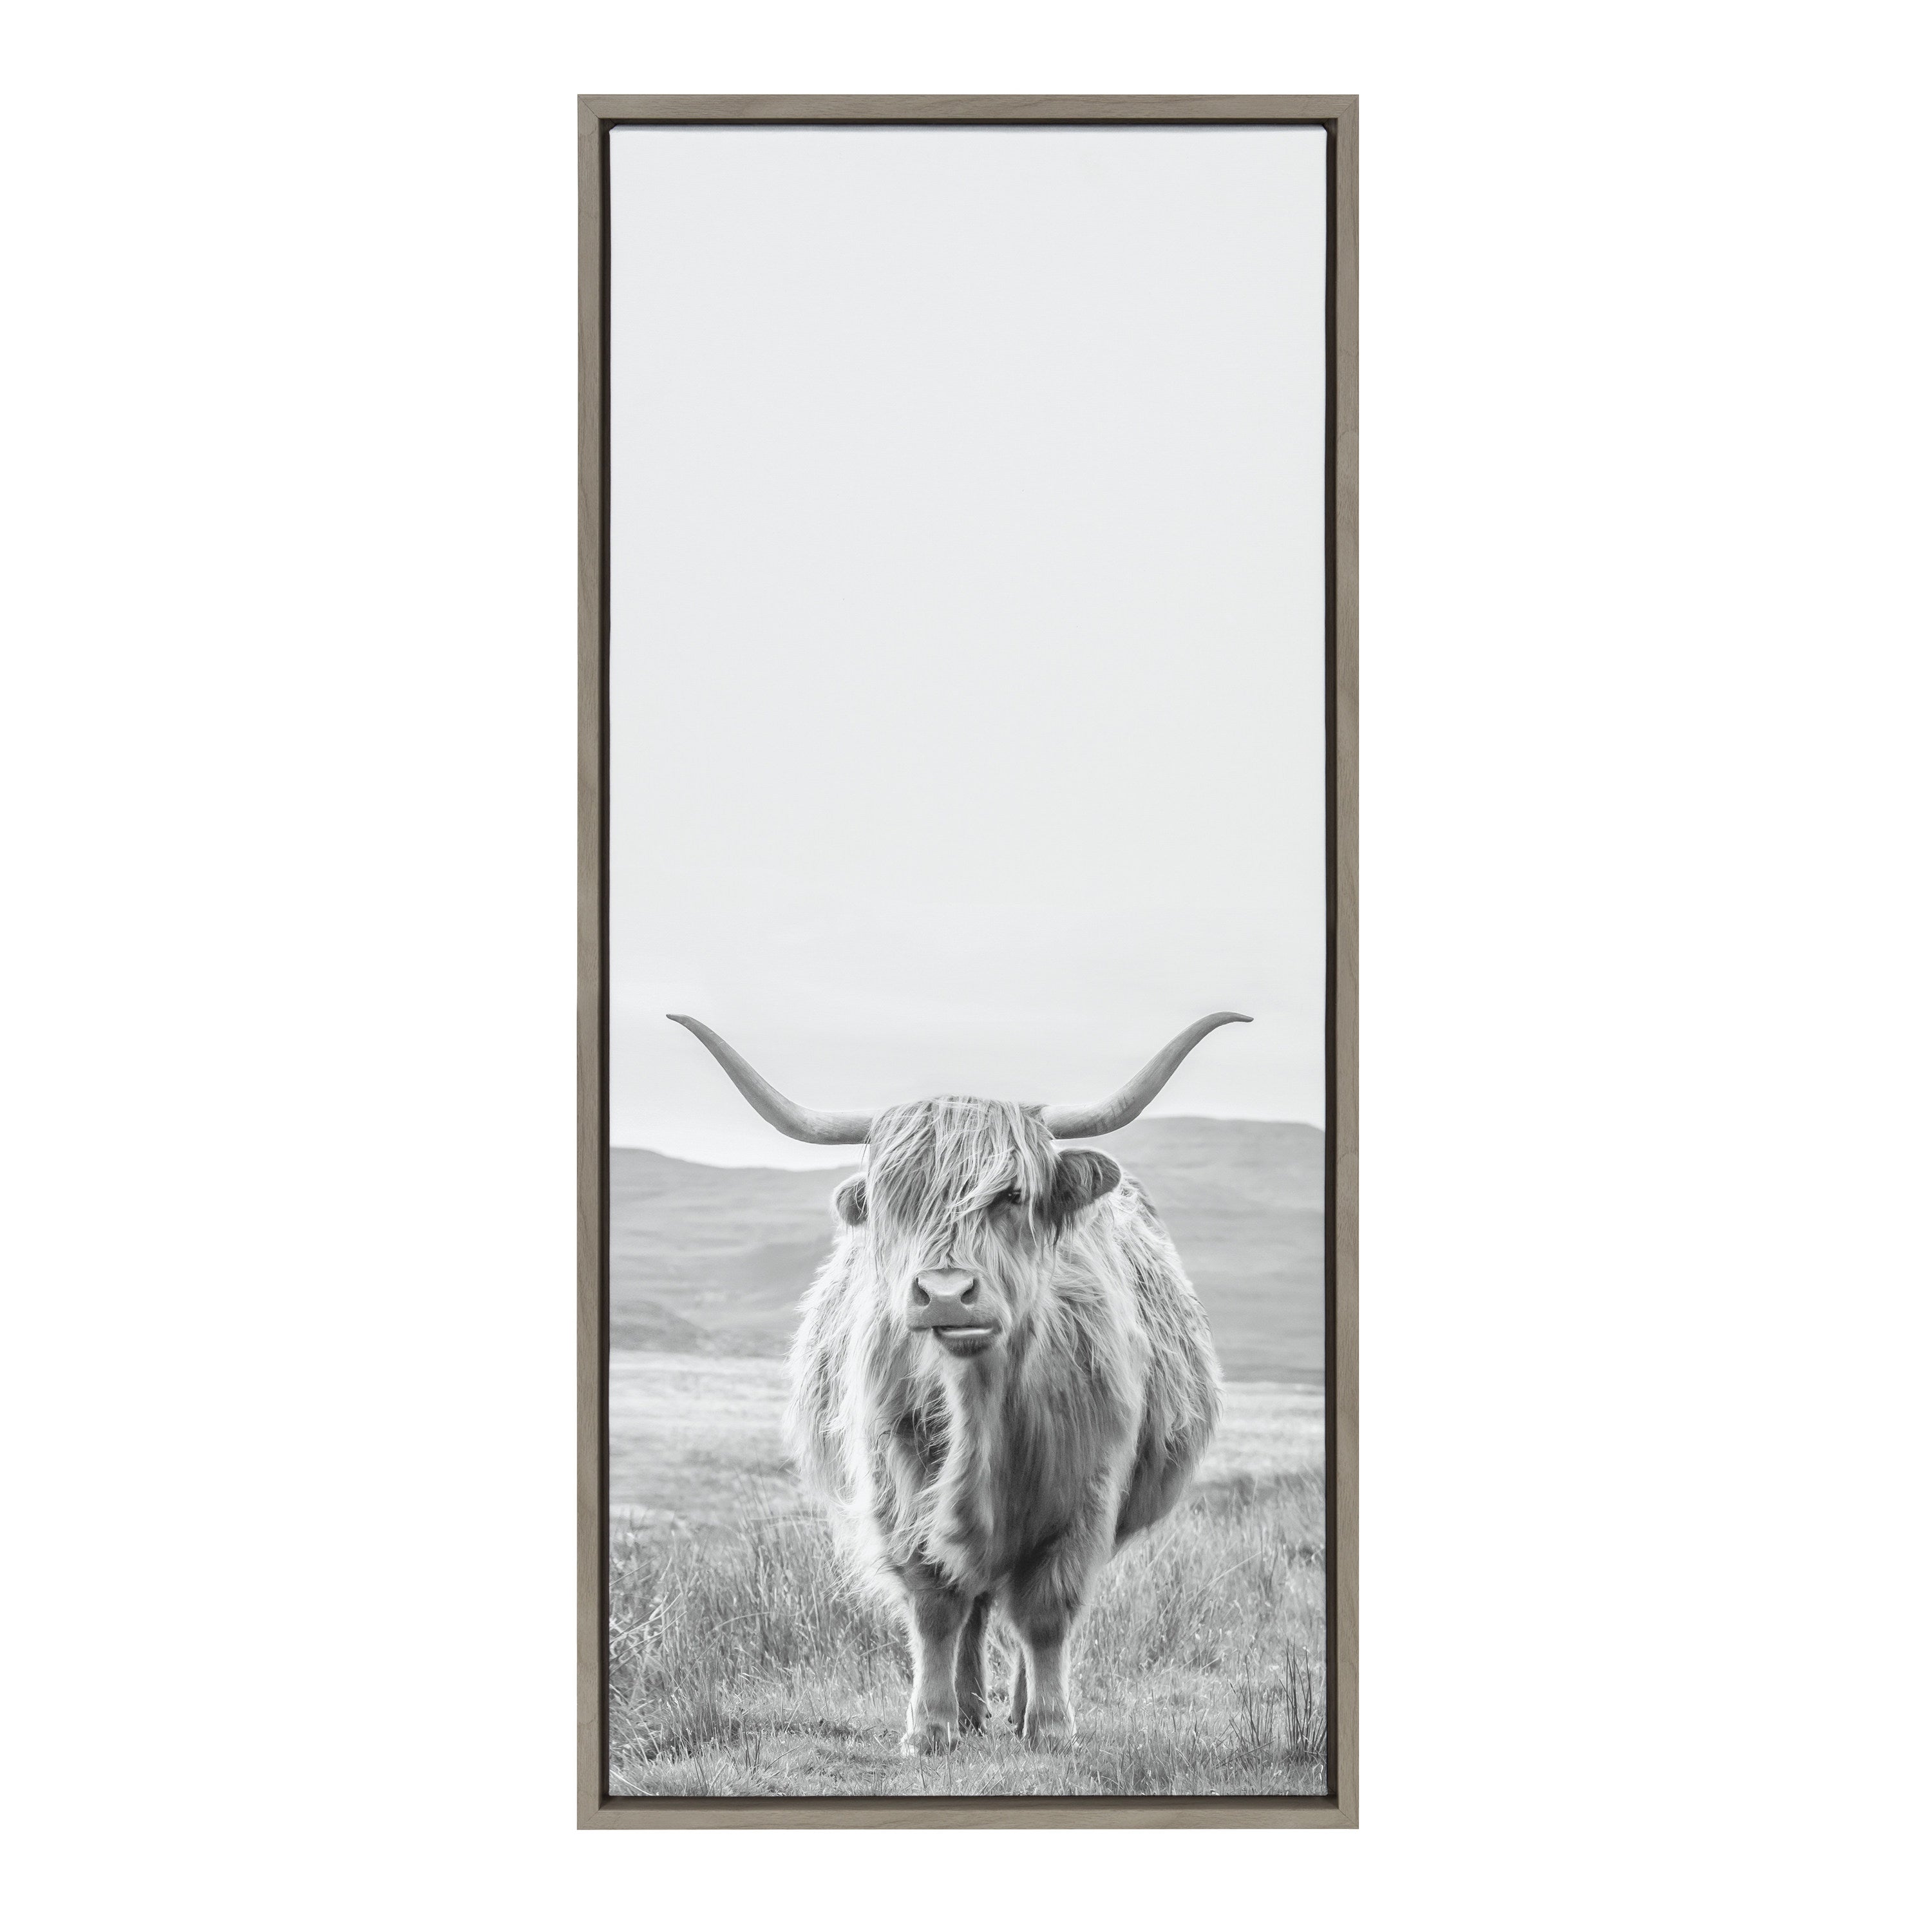 Sylvie Highland Cow Mountain Landscape Black and White Framed Canvas by The Creative Bunch Studio